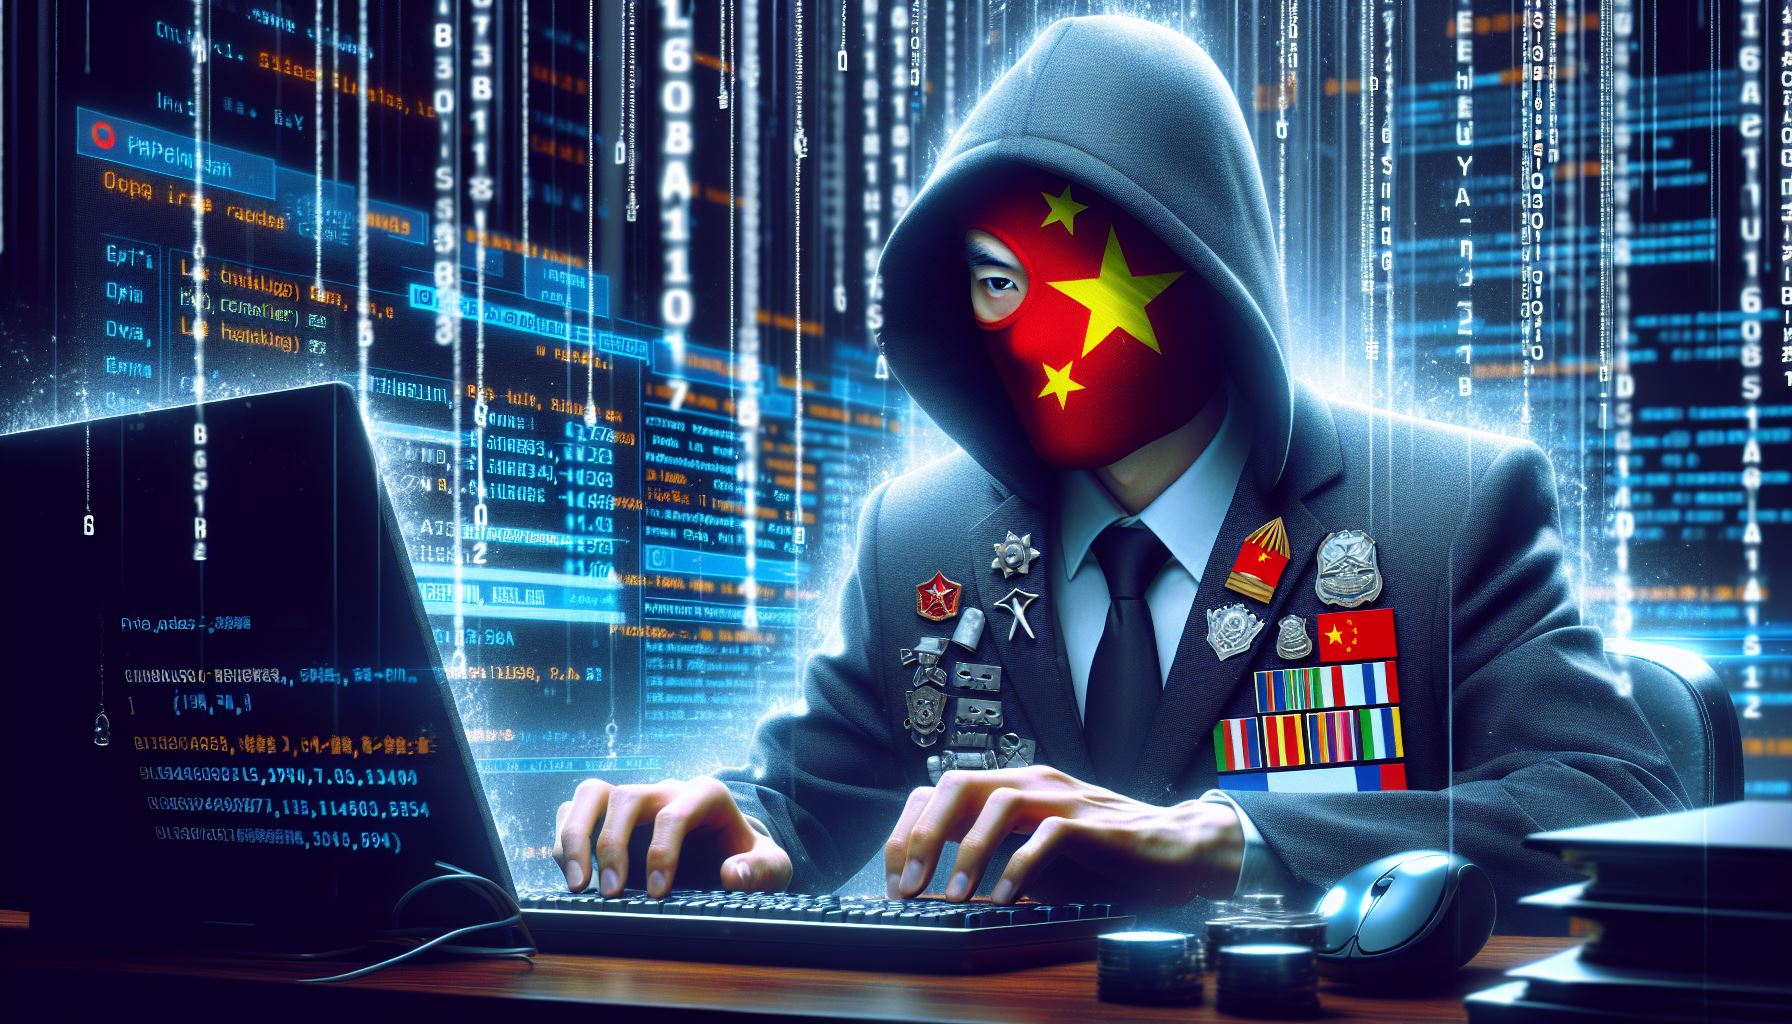 Chinese Cyber Group Hacked Thousands of Cisco Devices in Just Over a Month